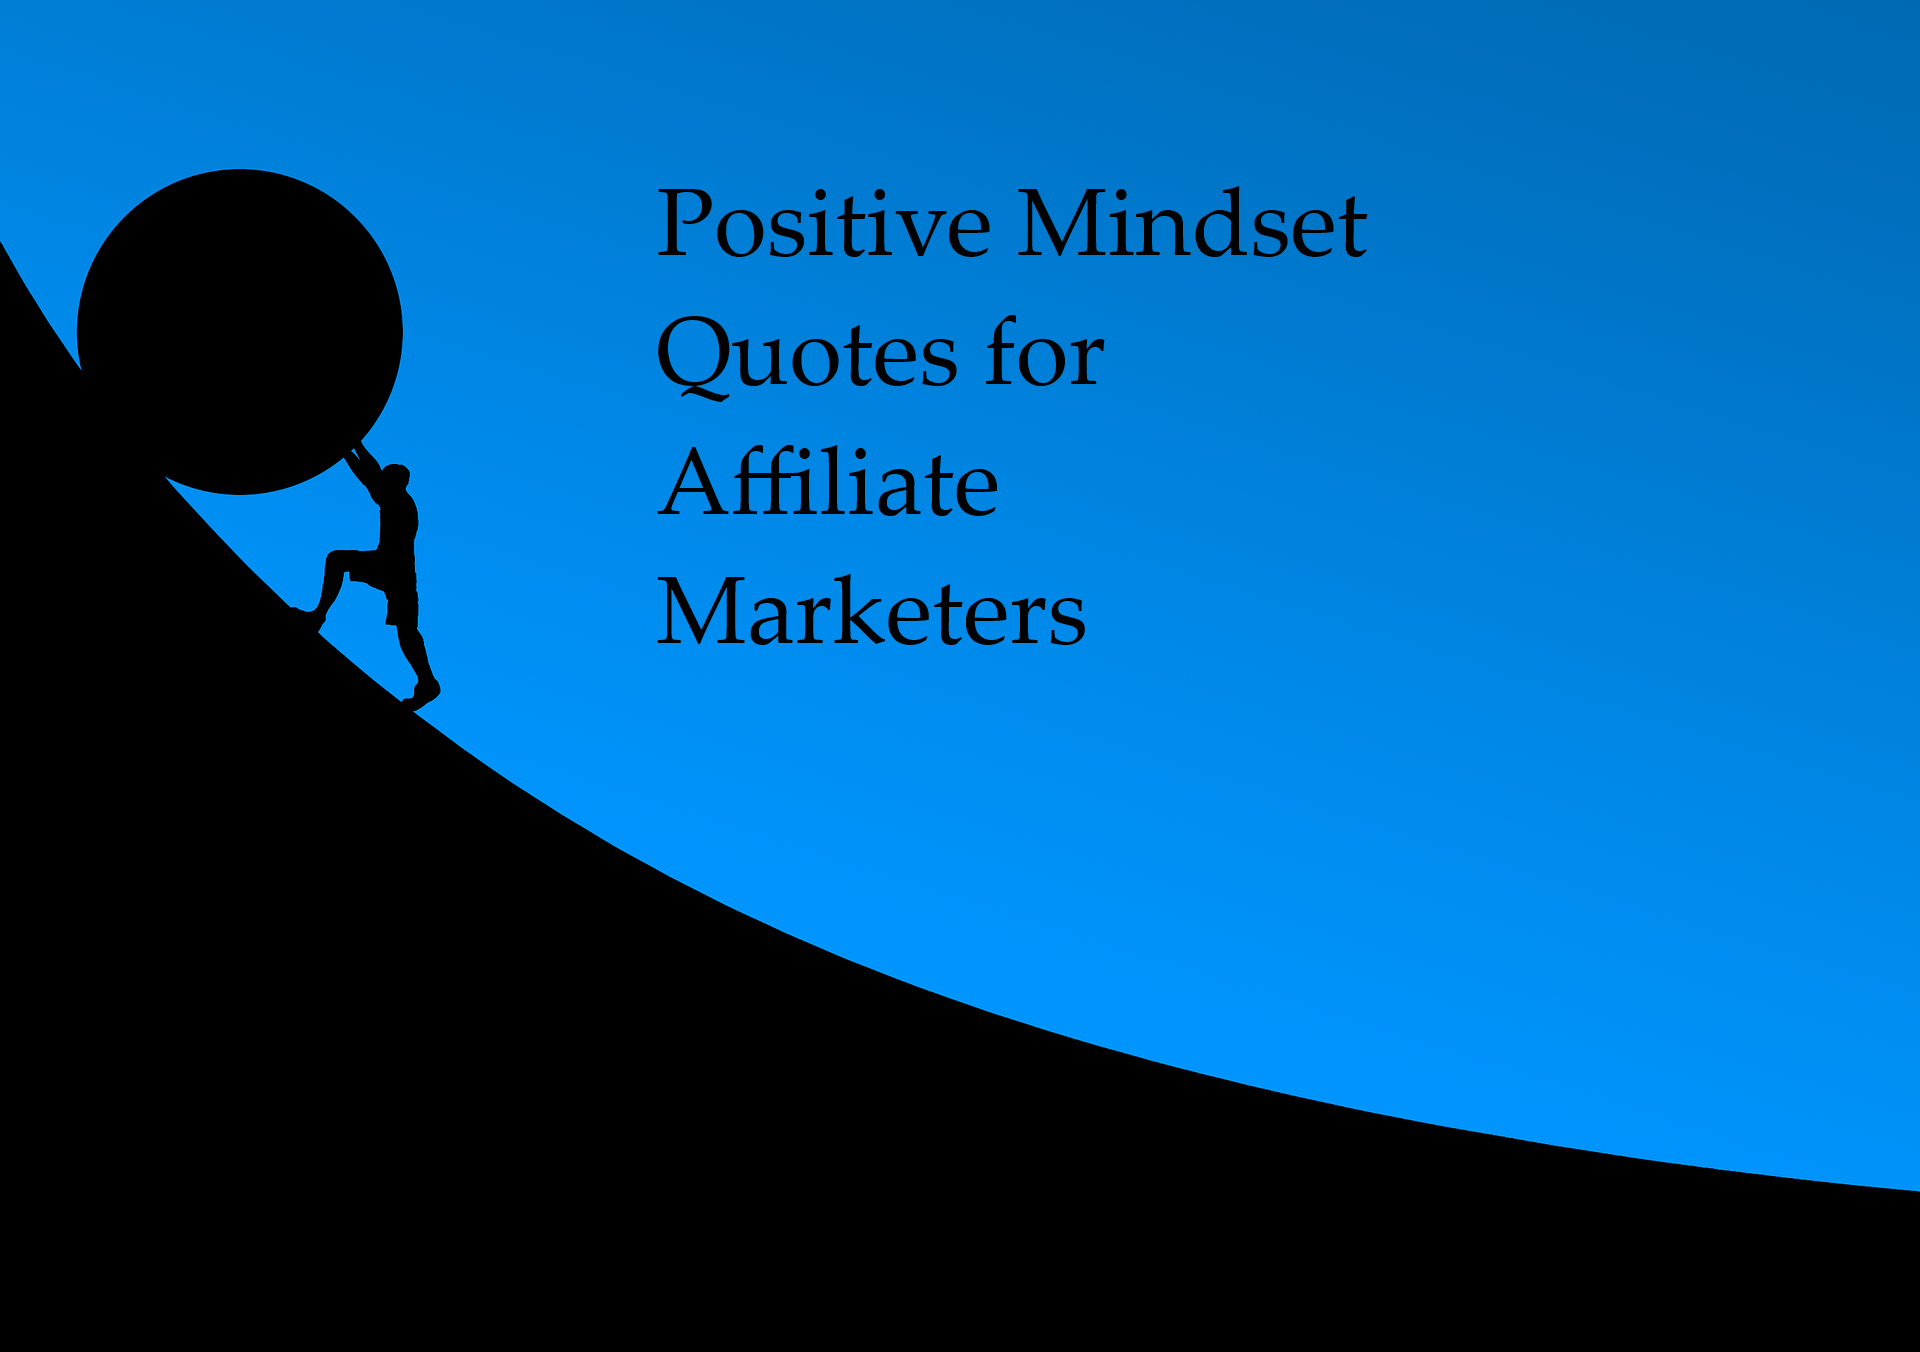 Positive Mindset Quotes for Affiliate Marketers